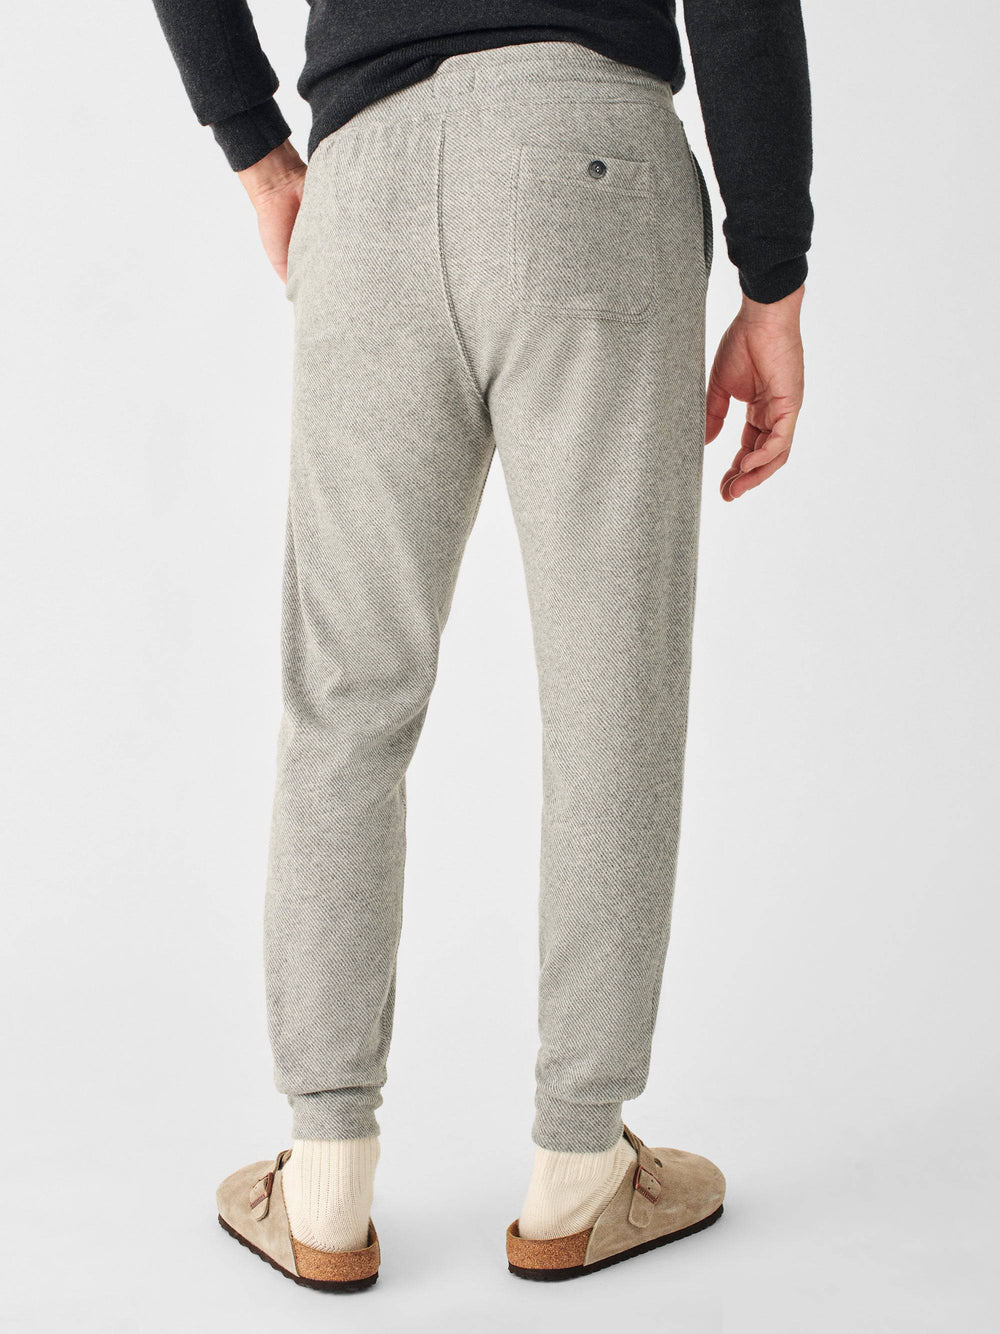 Faherty Faherty Legend Sweatpant Fossil Grey Twill